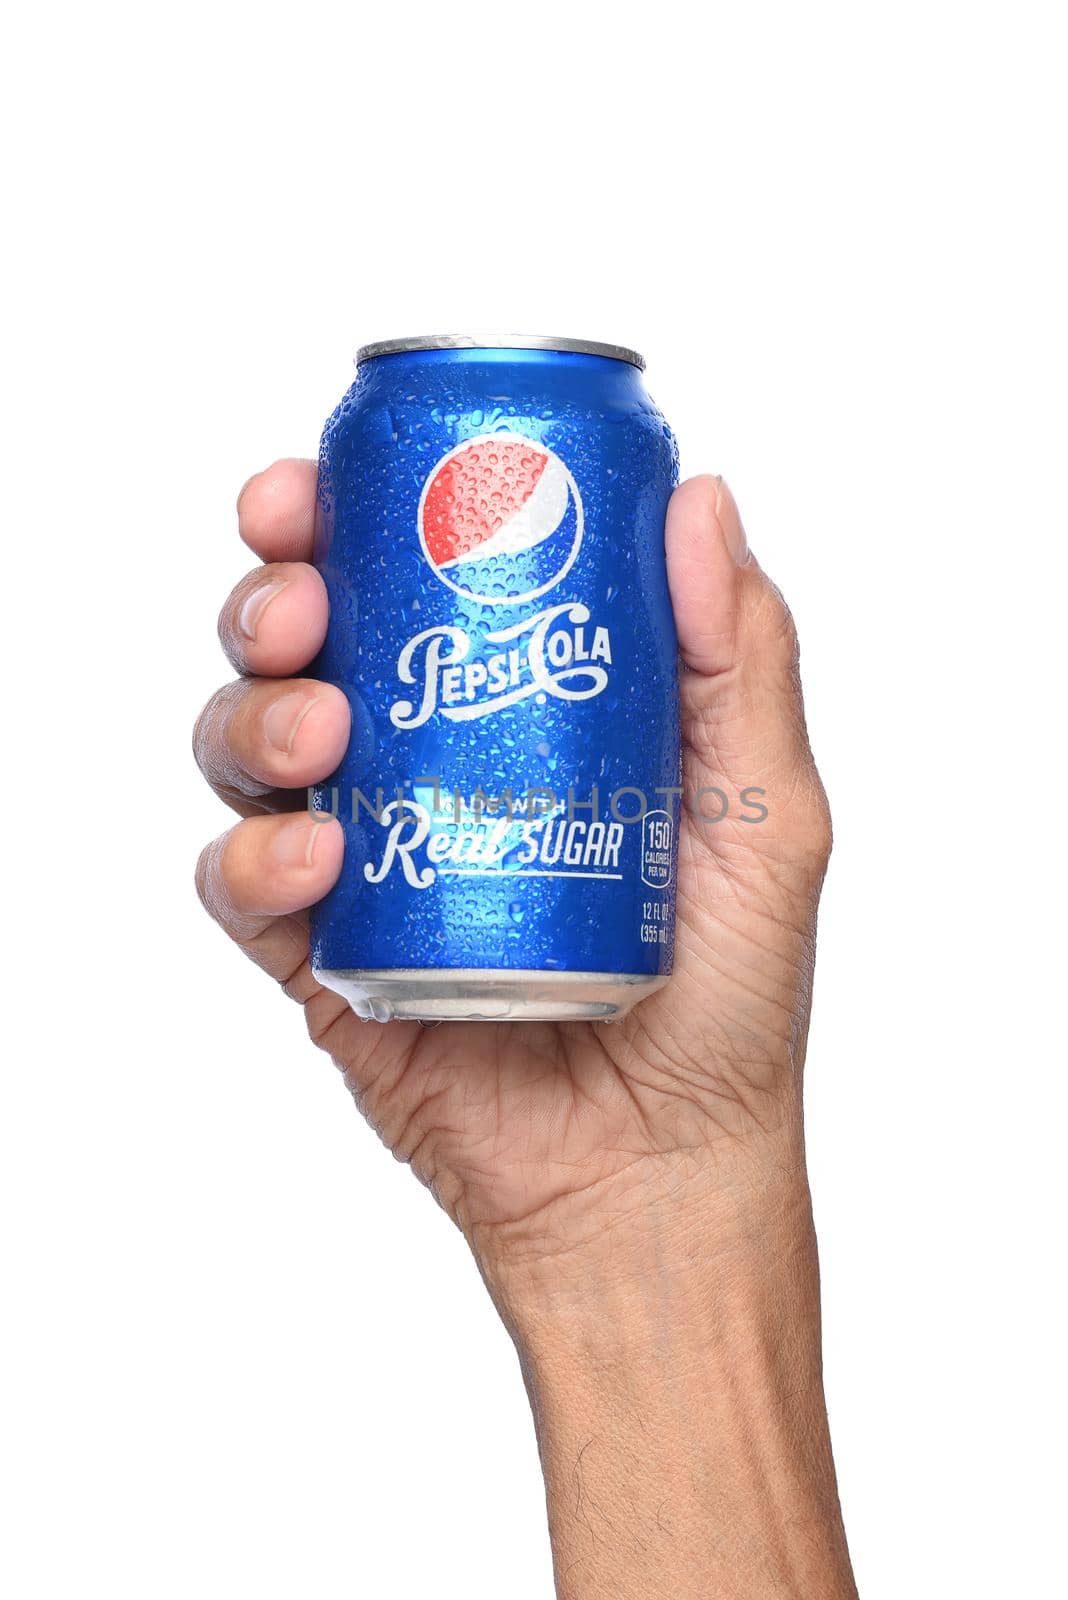 IRVINE, CALIFORNIA - APRIL 26, 2019: Closeup of a hand holding a cold can of Pepsi Cola, made with real sugar.